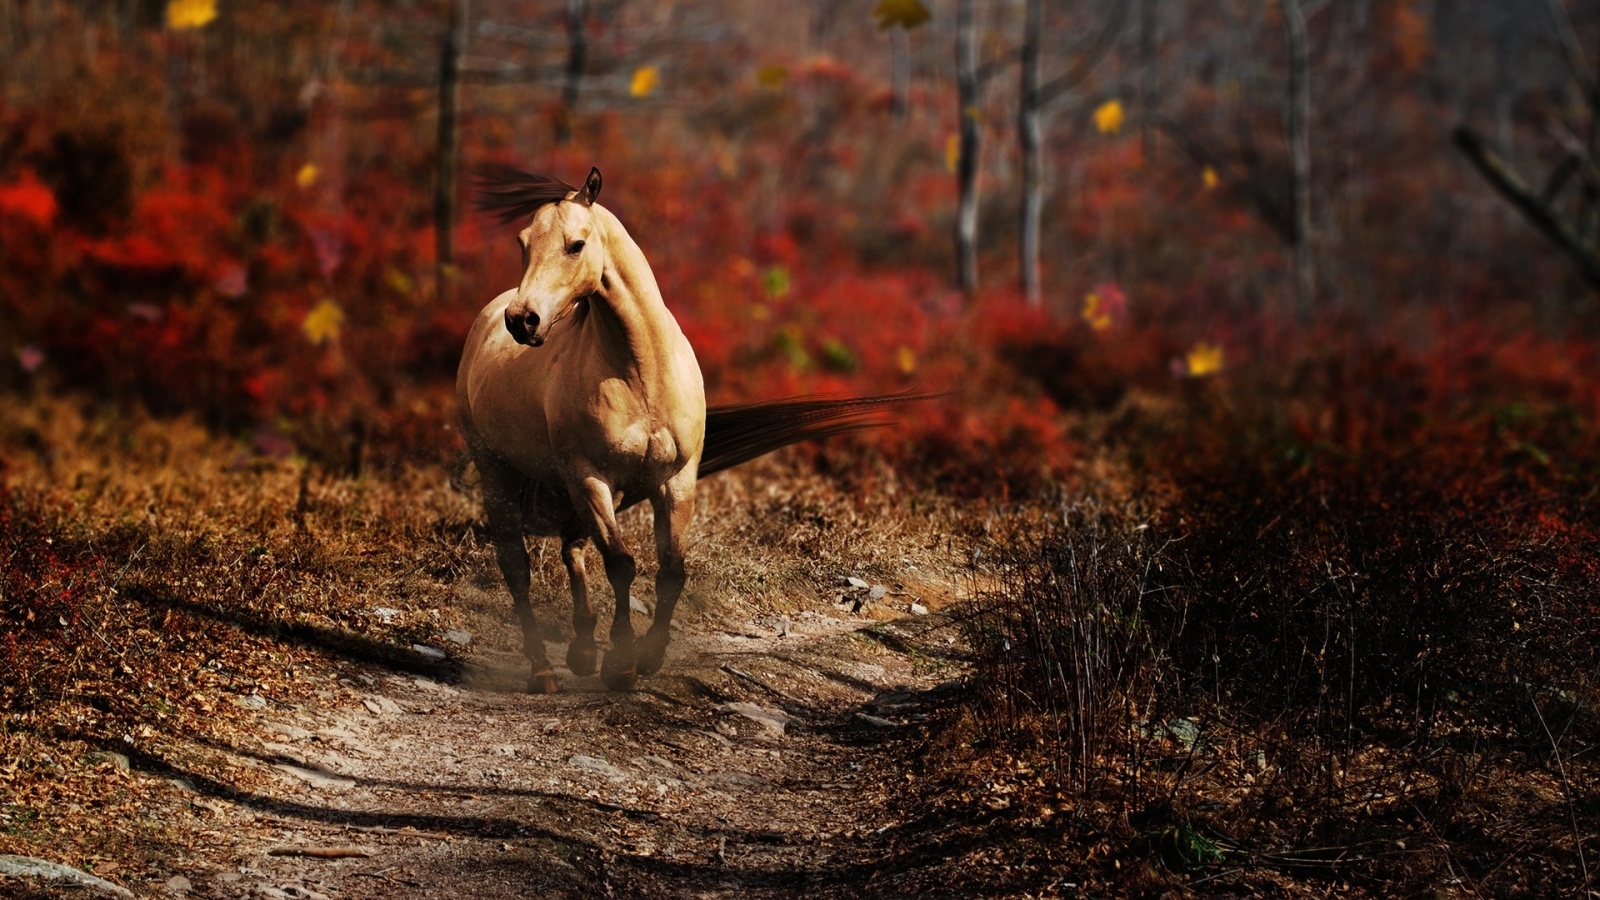 wallpaper latest horse wallpaper awesome horse wallpaper pair horse